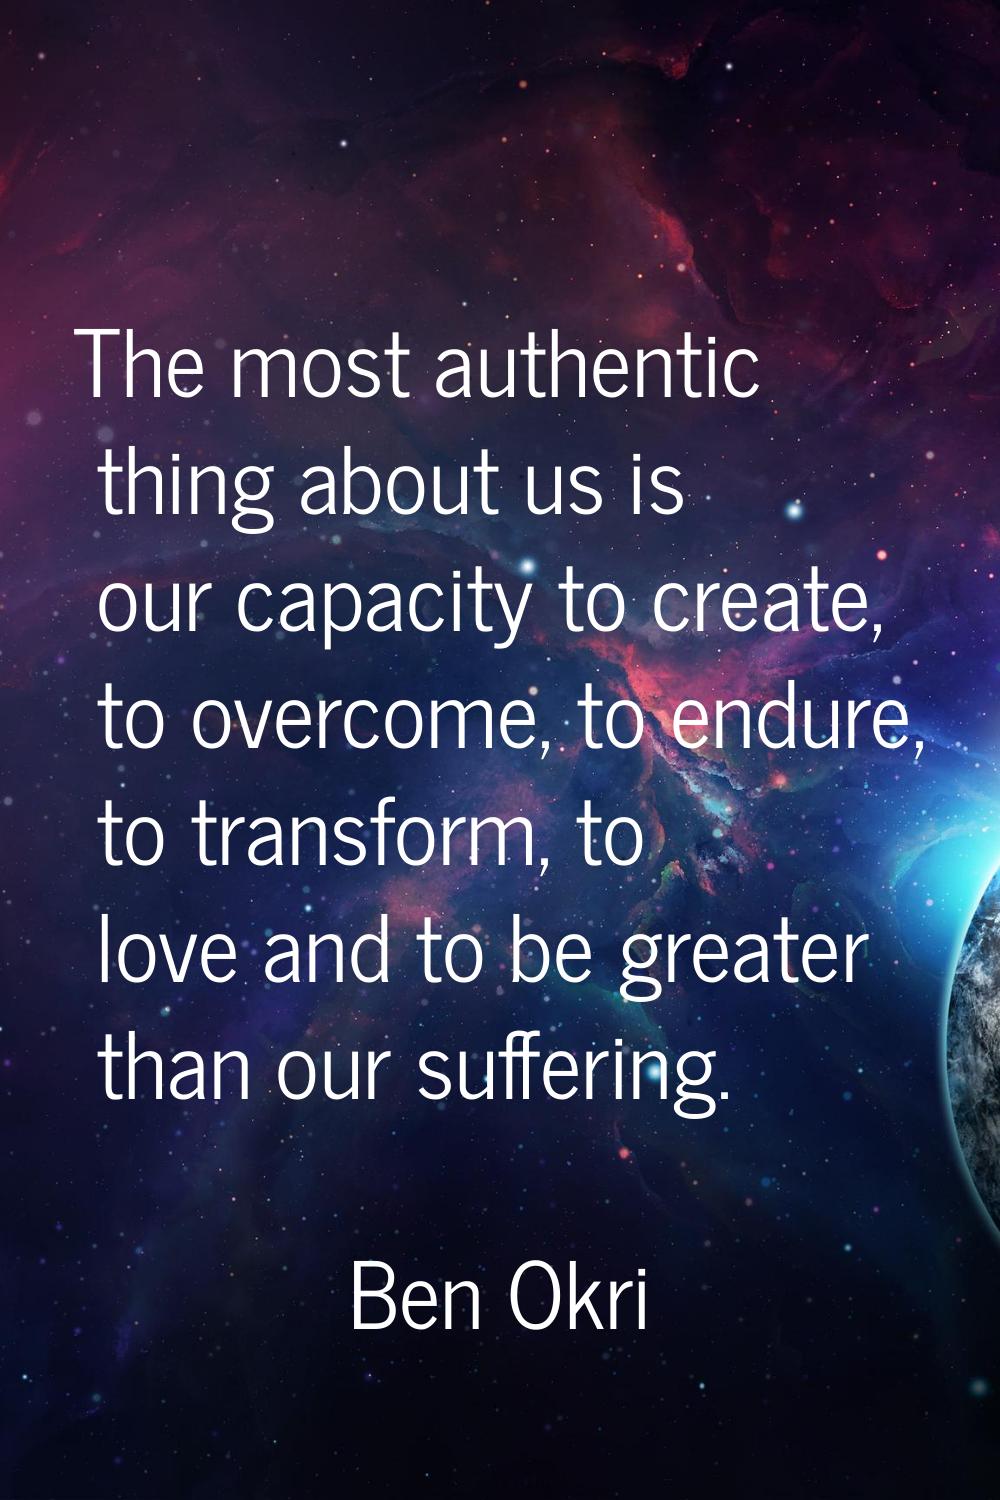 The most authentic thing about us is our capacity to create, to overcome, to endure, to transform, 